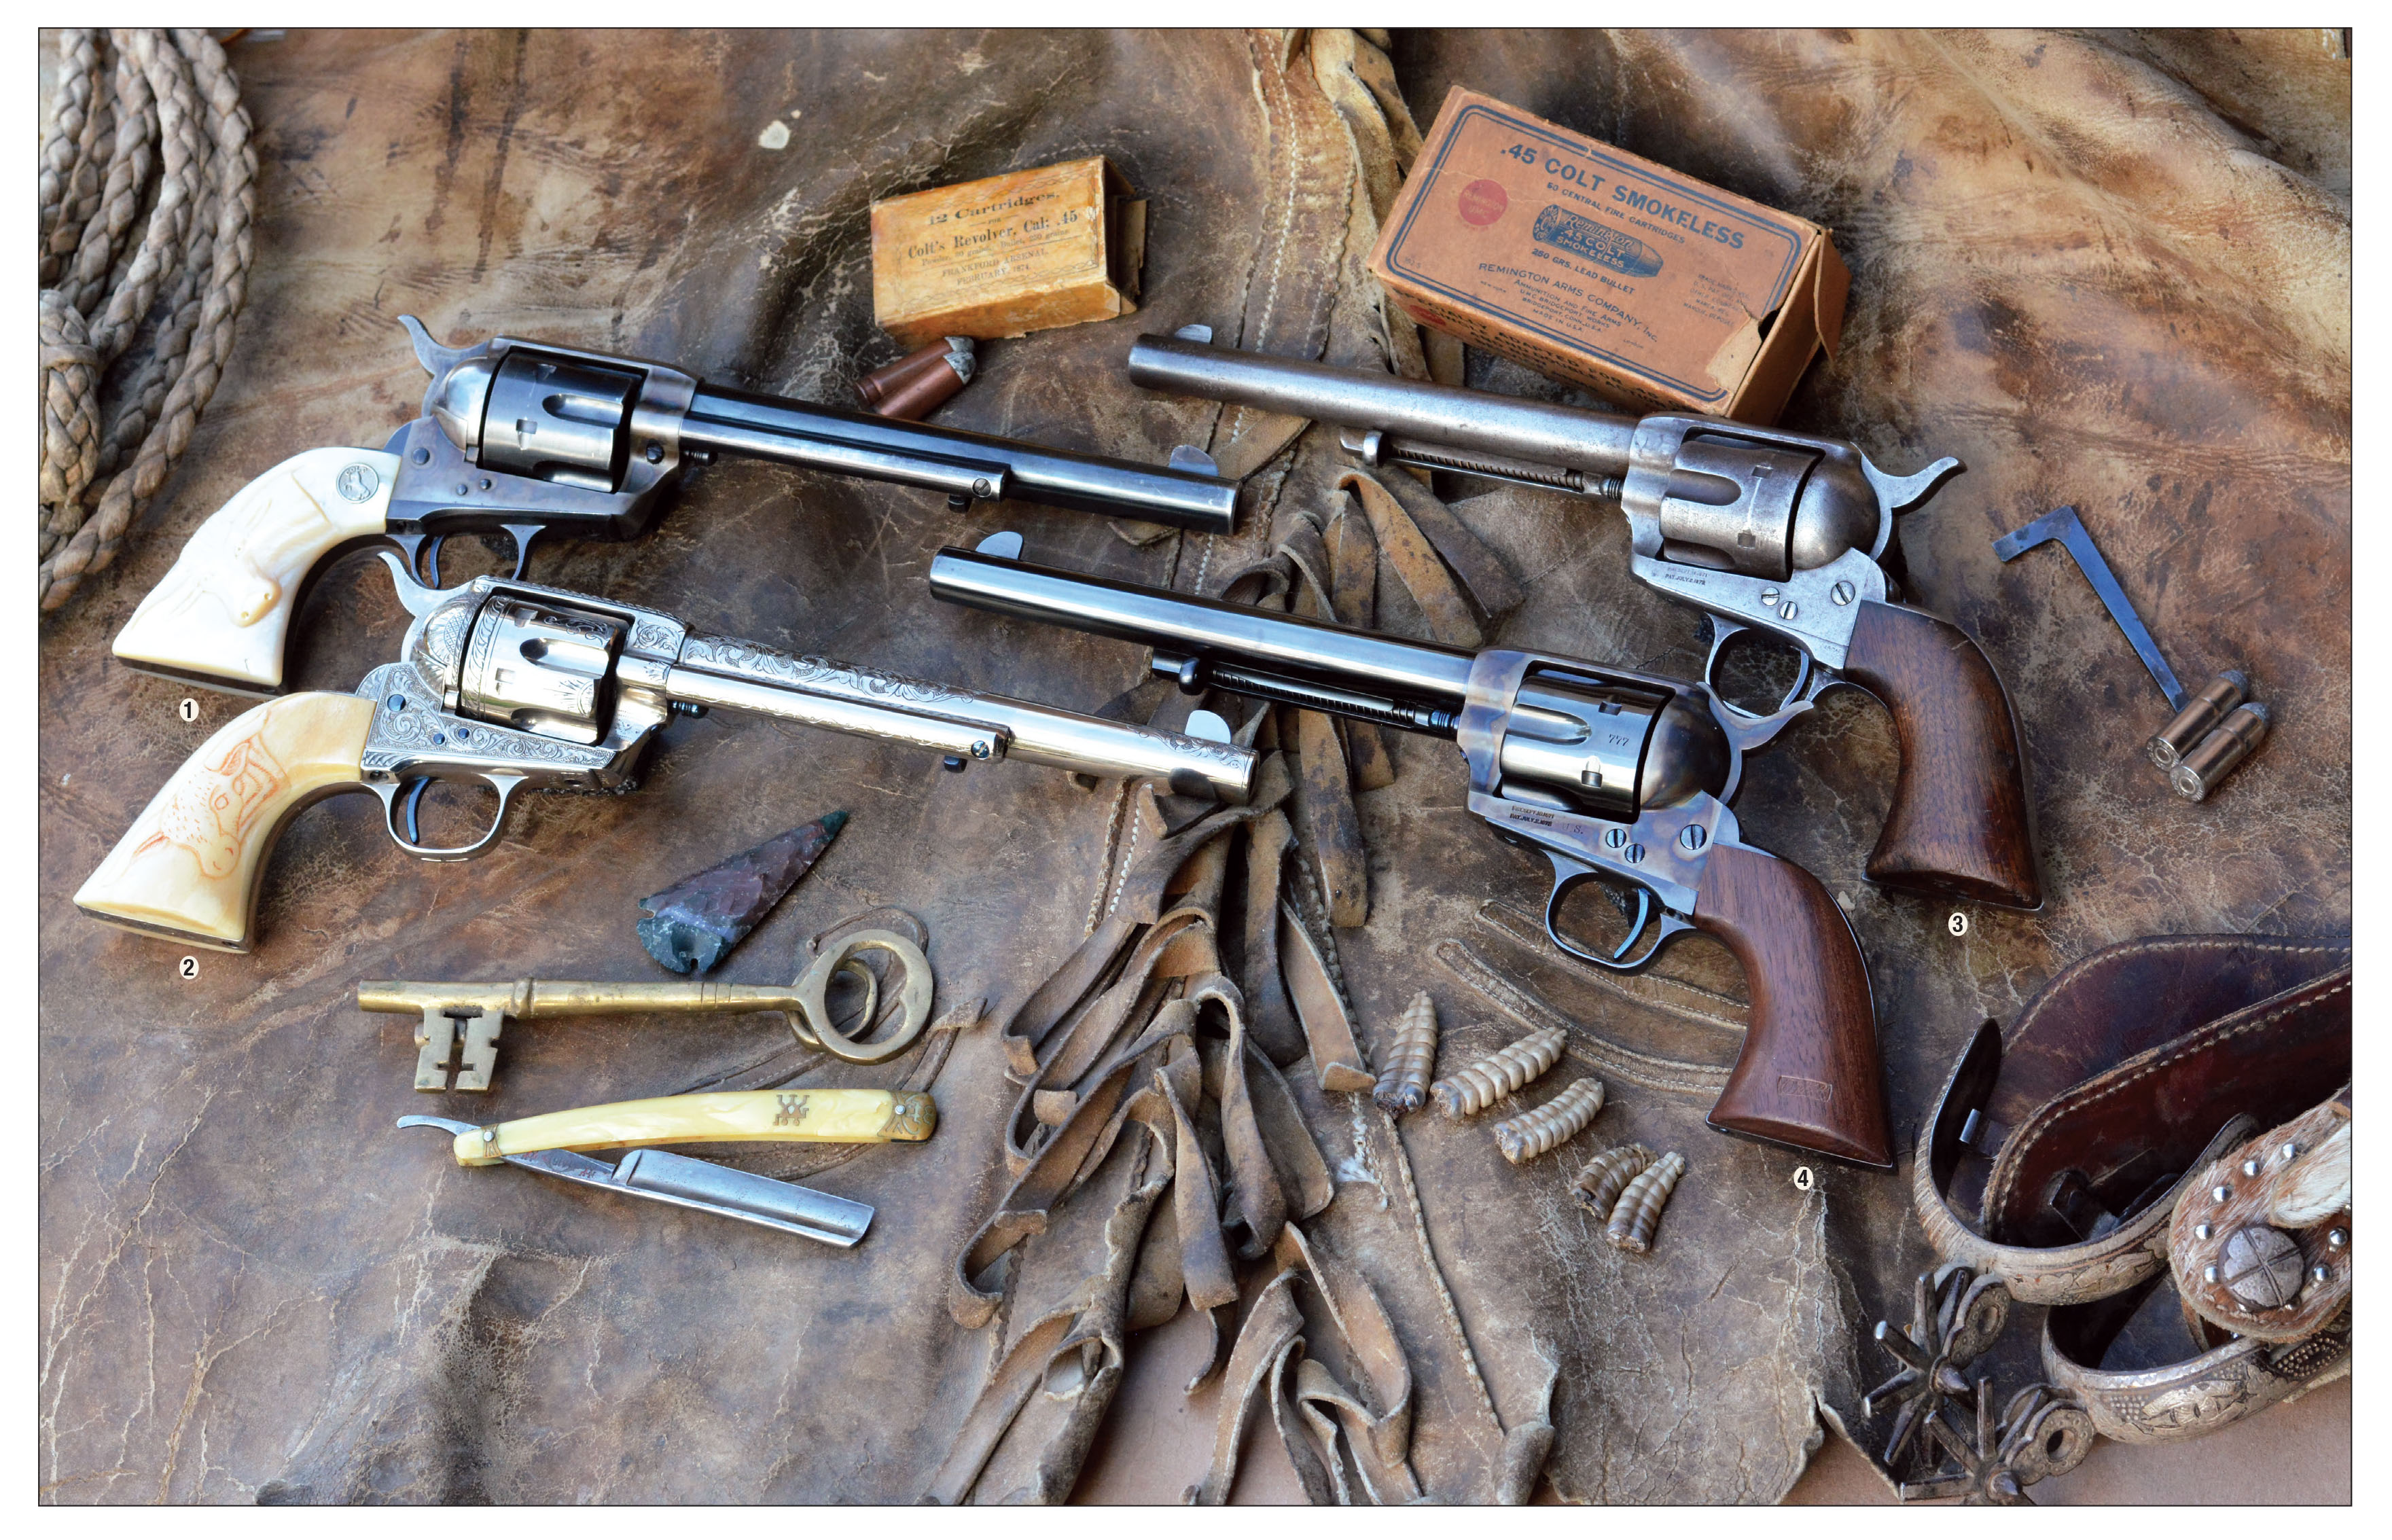 The Colt Single Action Army was designed in 1871 and 1872 and officially adopted by the U.S. Cavalry in 1873, but it also found instant acceptance with civilians. Pre-World War II examples include: (1) original smokeless-era 45 Colt with desirable factory shipped steer-head carved mother of pearl stocks, (2) 1881-era COLT FRONTIER SIX SHOOTER 44-40 (restored),  (3) early 1875-era civilian gun with extensive frontier history and (4) U.S. Cavalry first-year production 45 Colt with a three-digit serial number (restored).